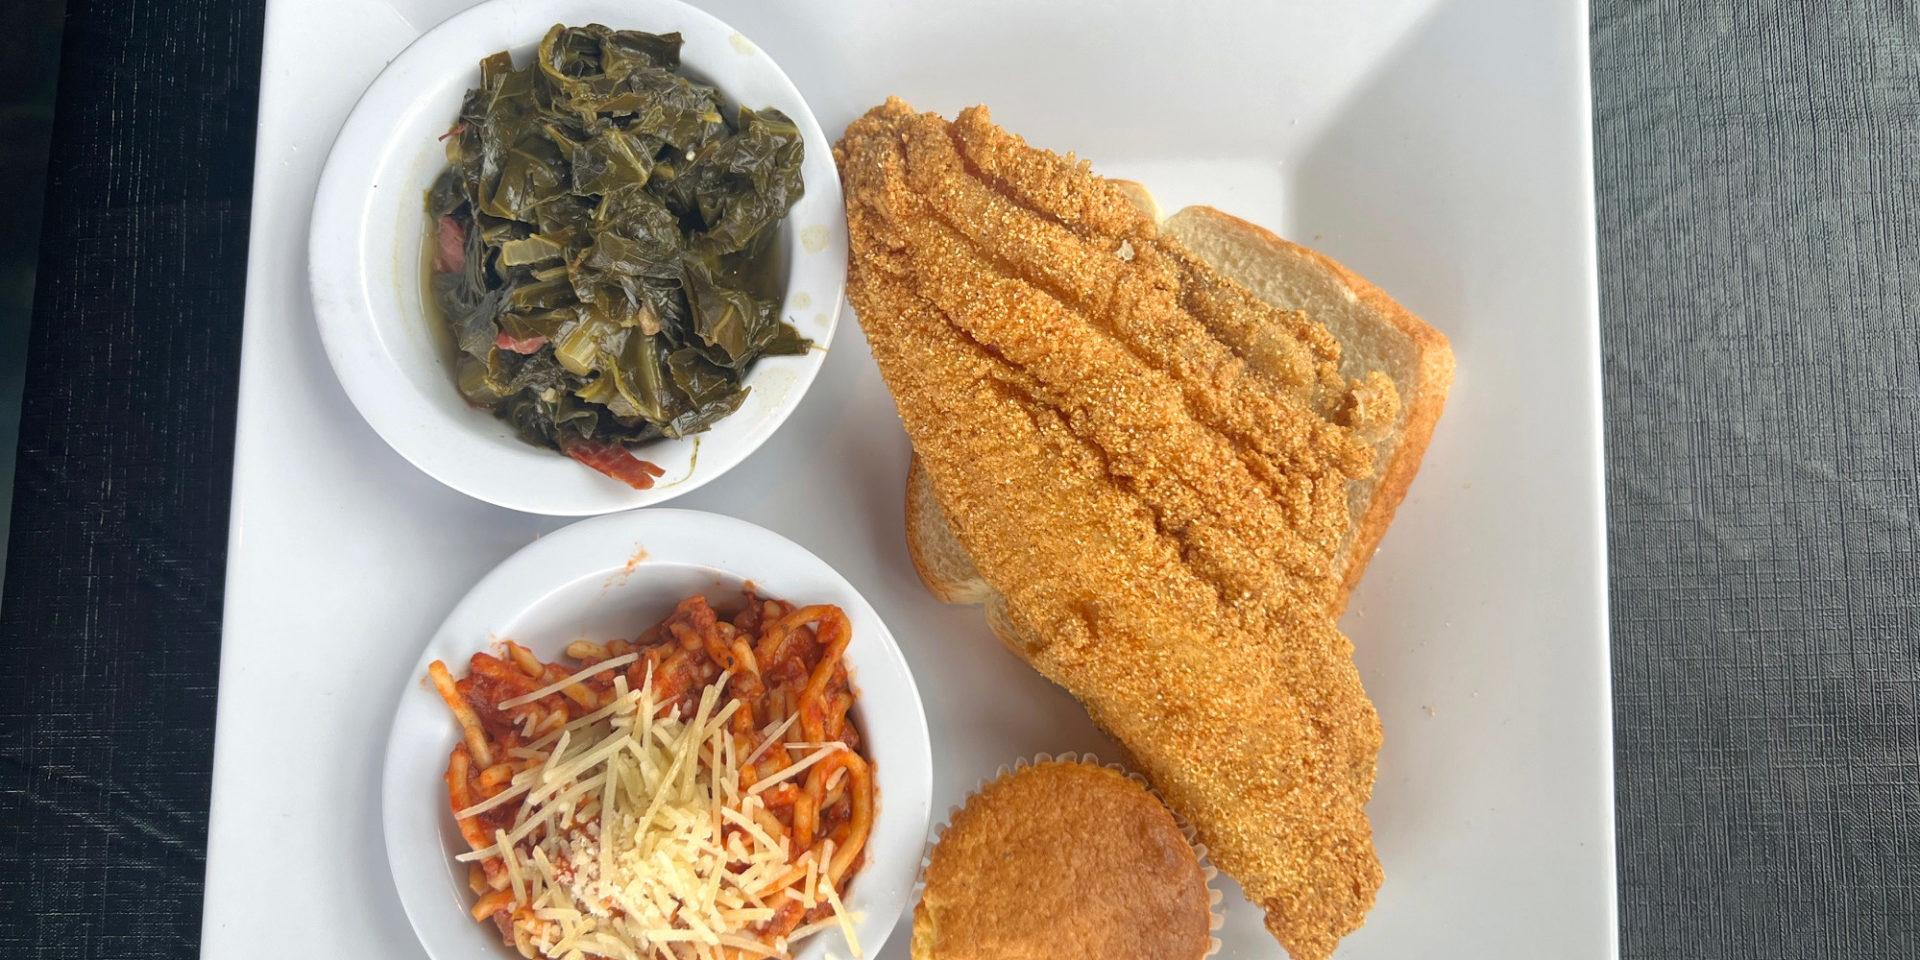 An order of fried catfish, cornbread, and sides of spaghetti and collared greens at Neil St Blues restaurant in Downtown Champaign.